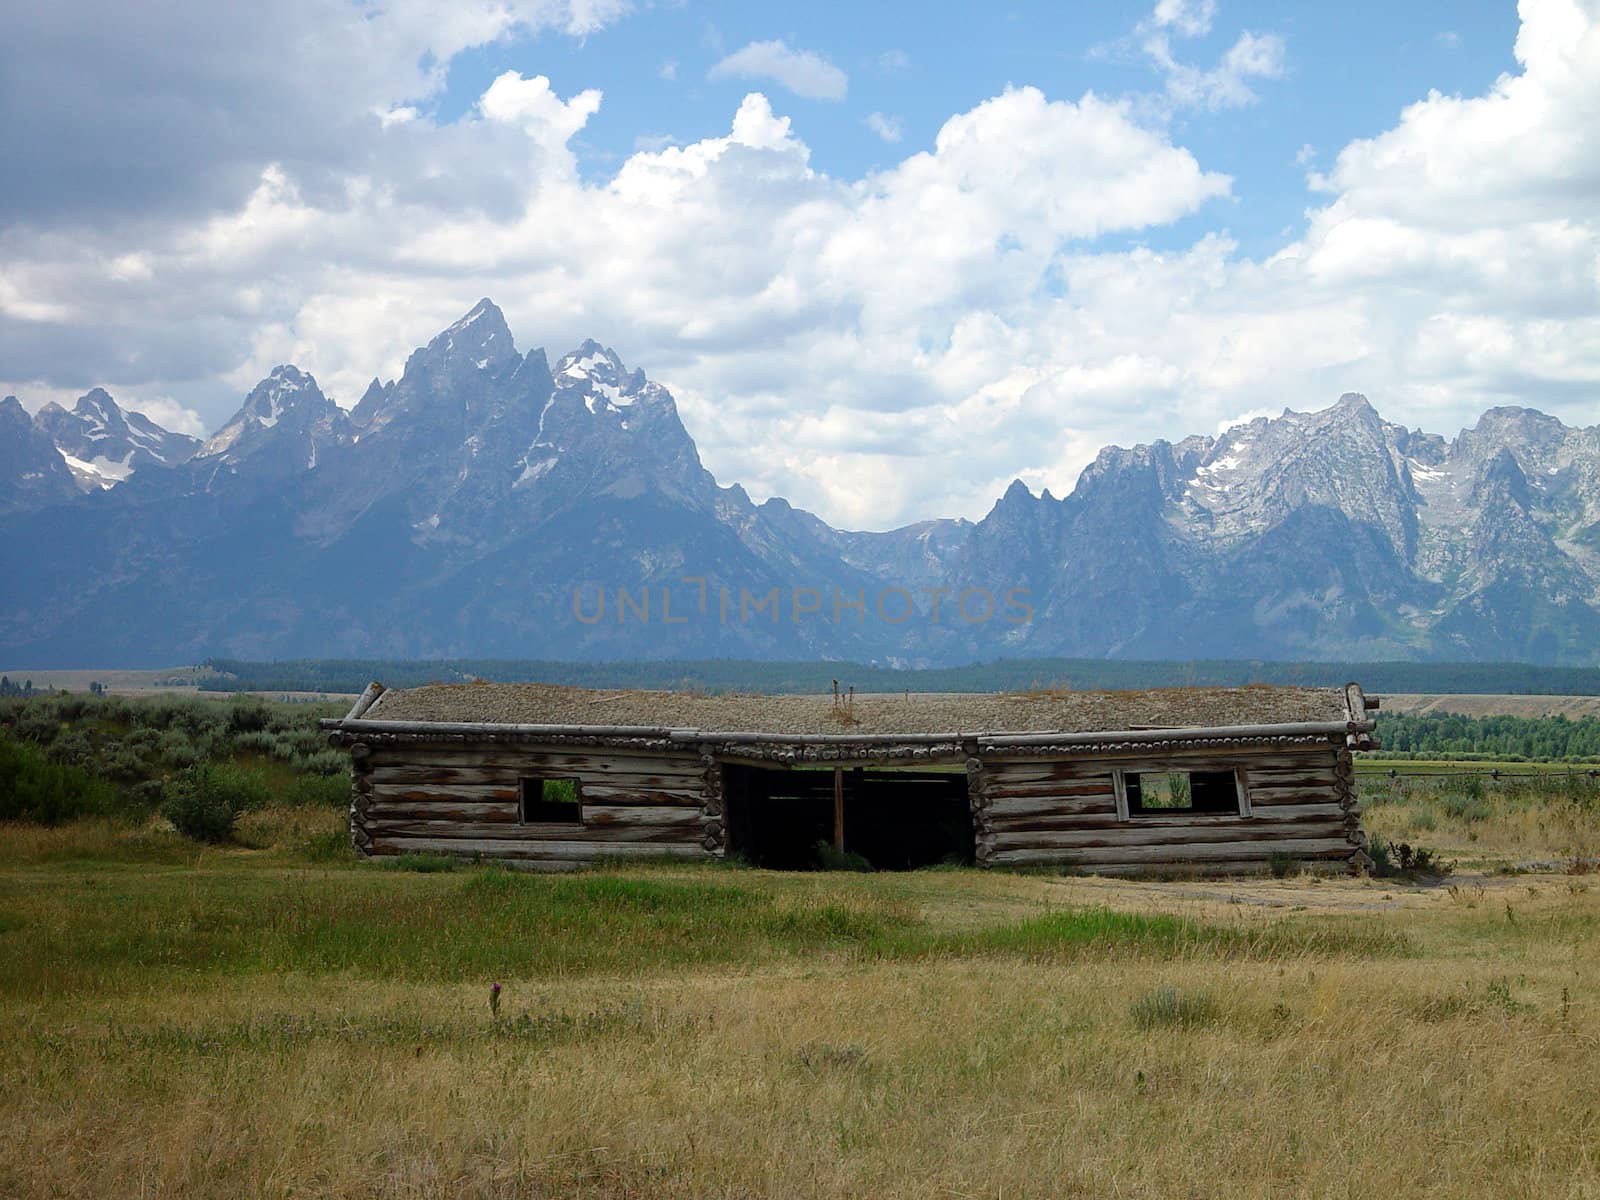 An old settlers home in the Teton Range.